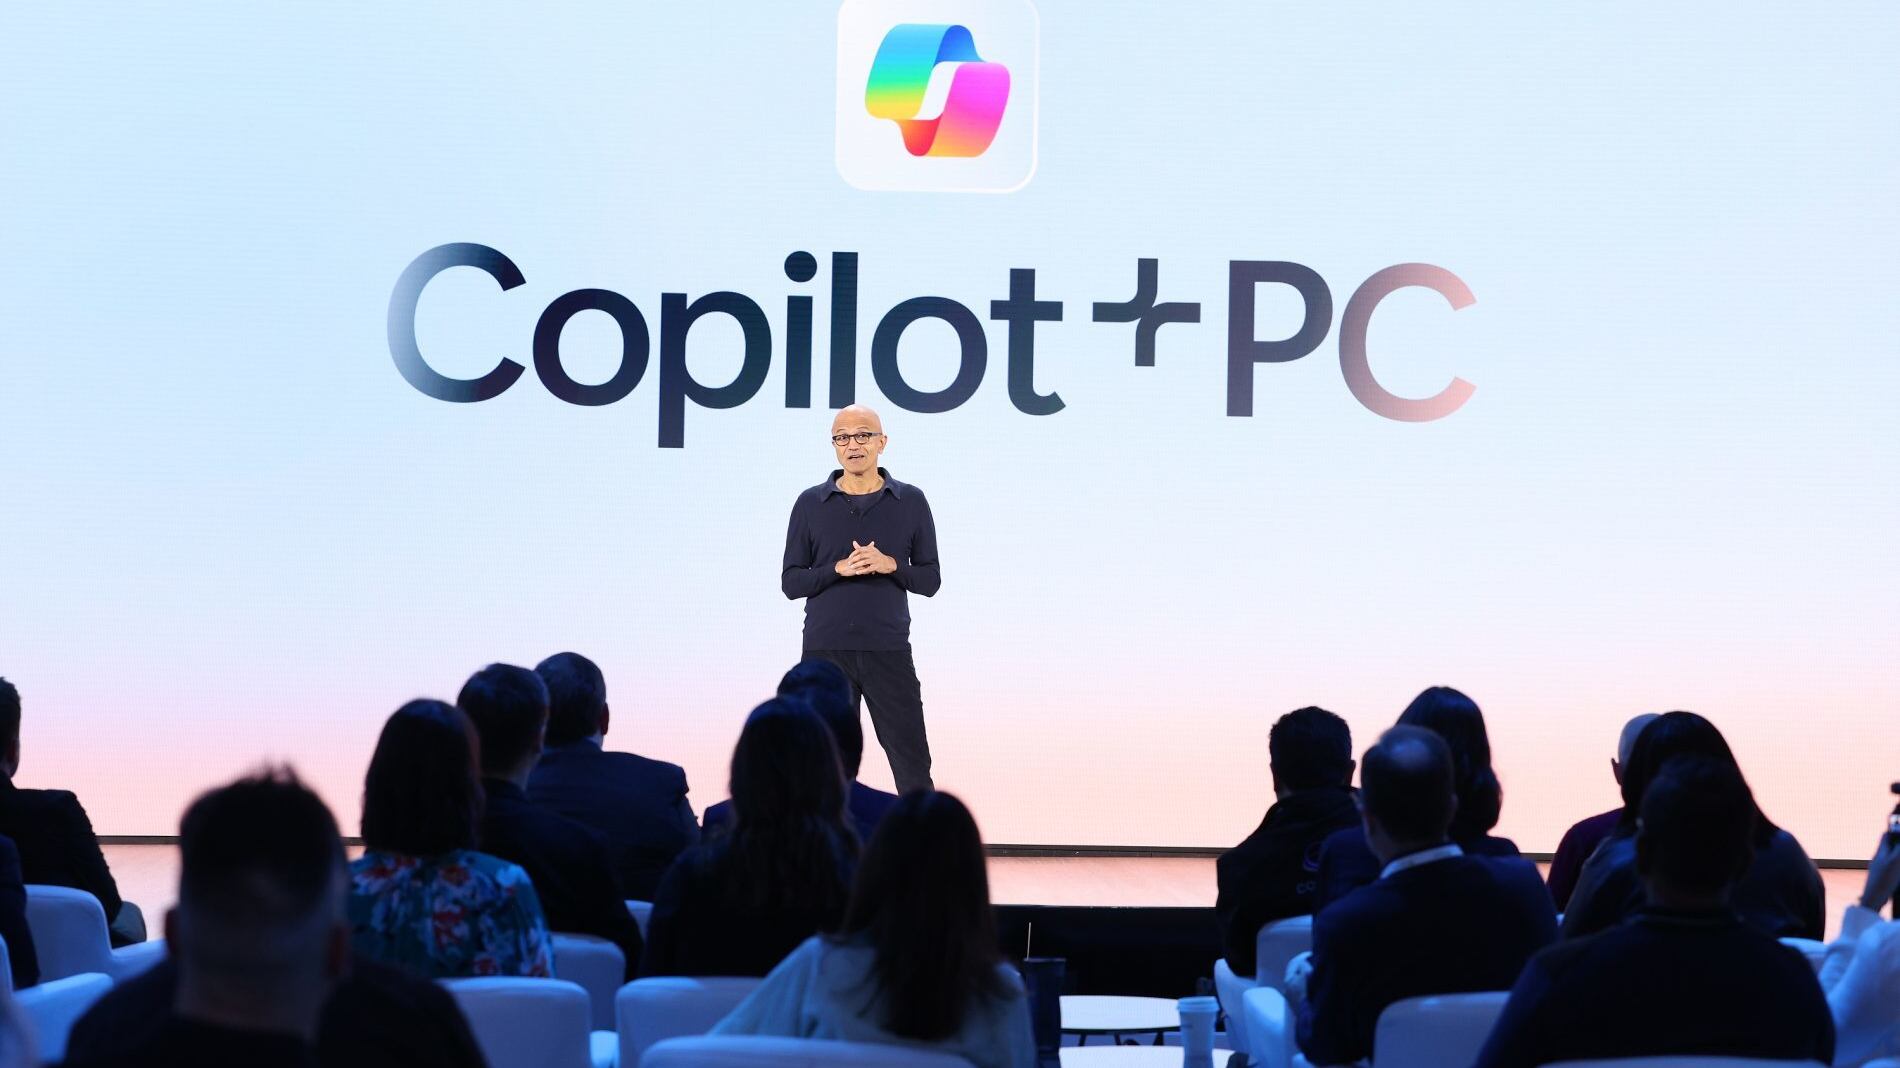 Microsoft said the tool will be exclusive to new AI-powered Copilot+ PCs